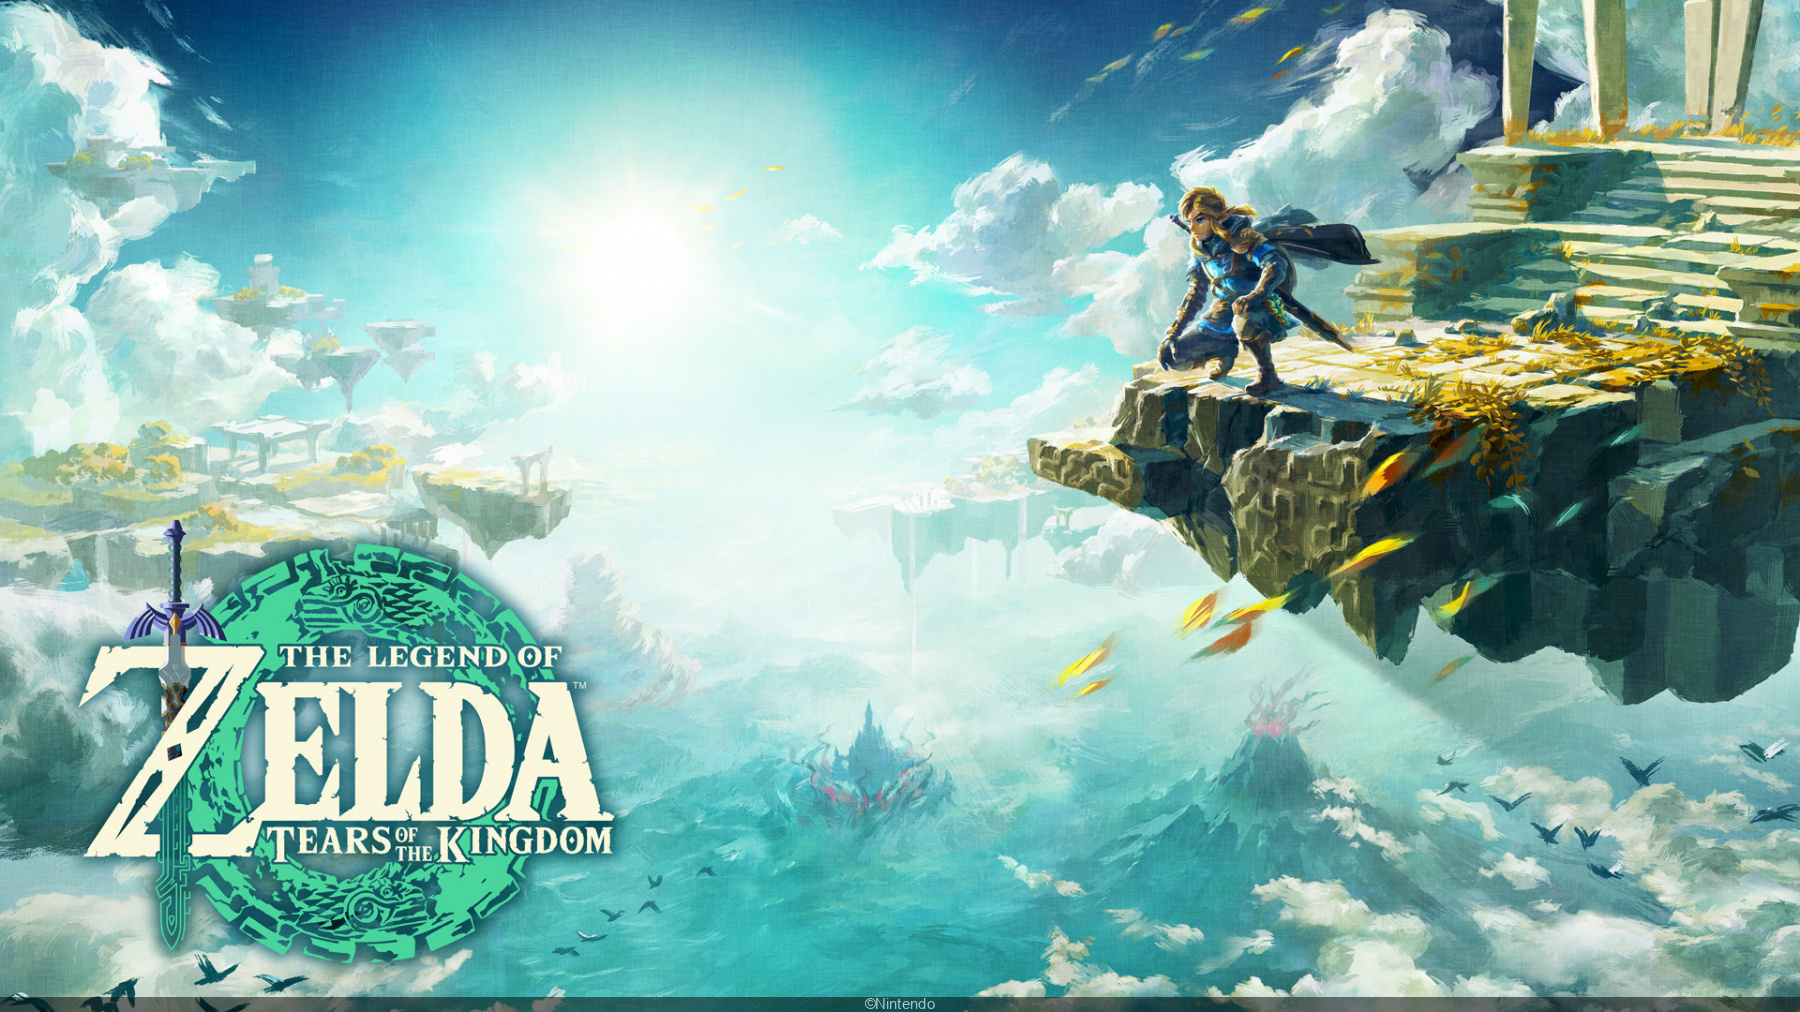 Zelda: Tears of the Kingdom will have its first PC release planned on day one of release.